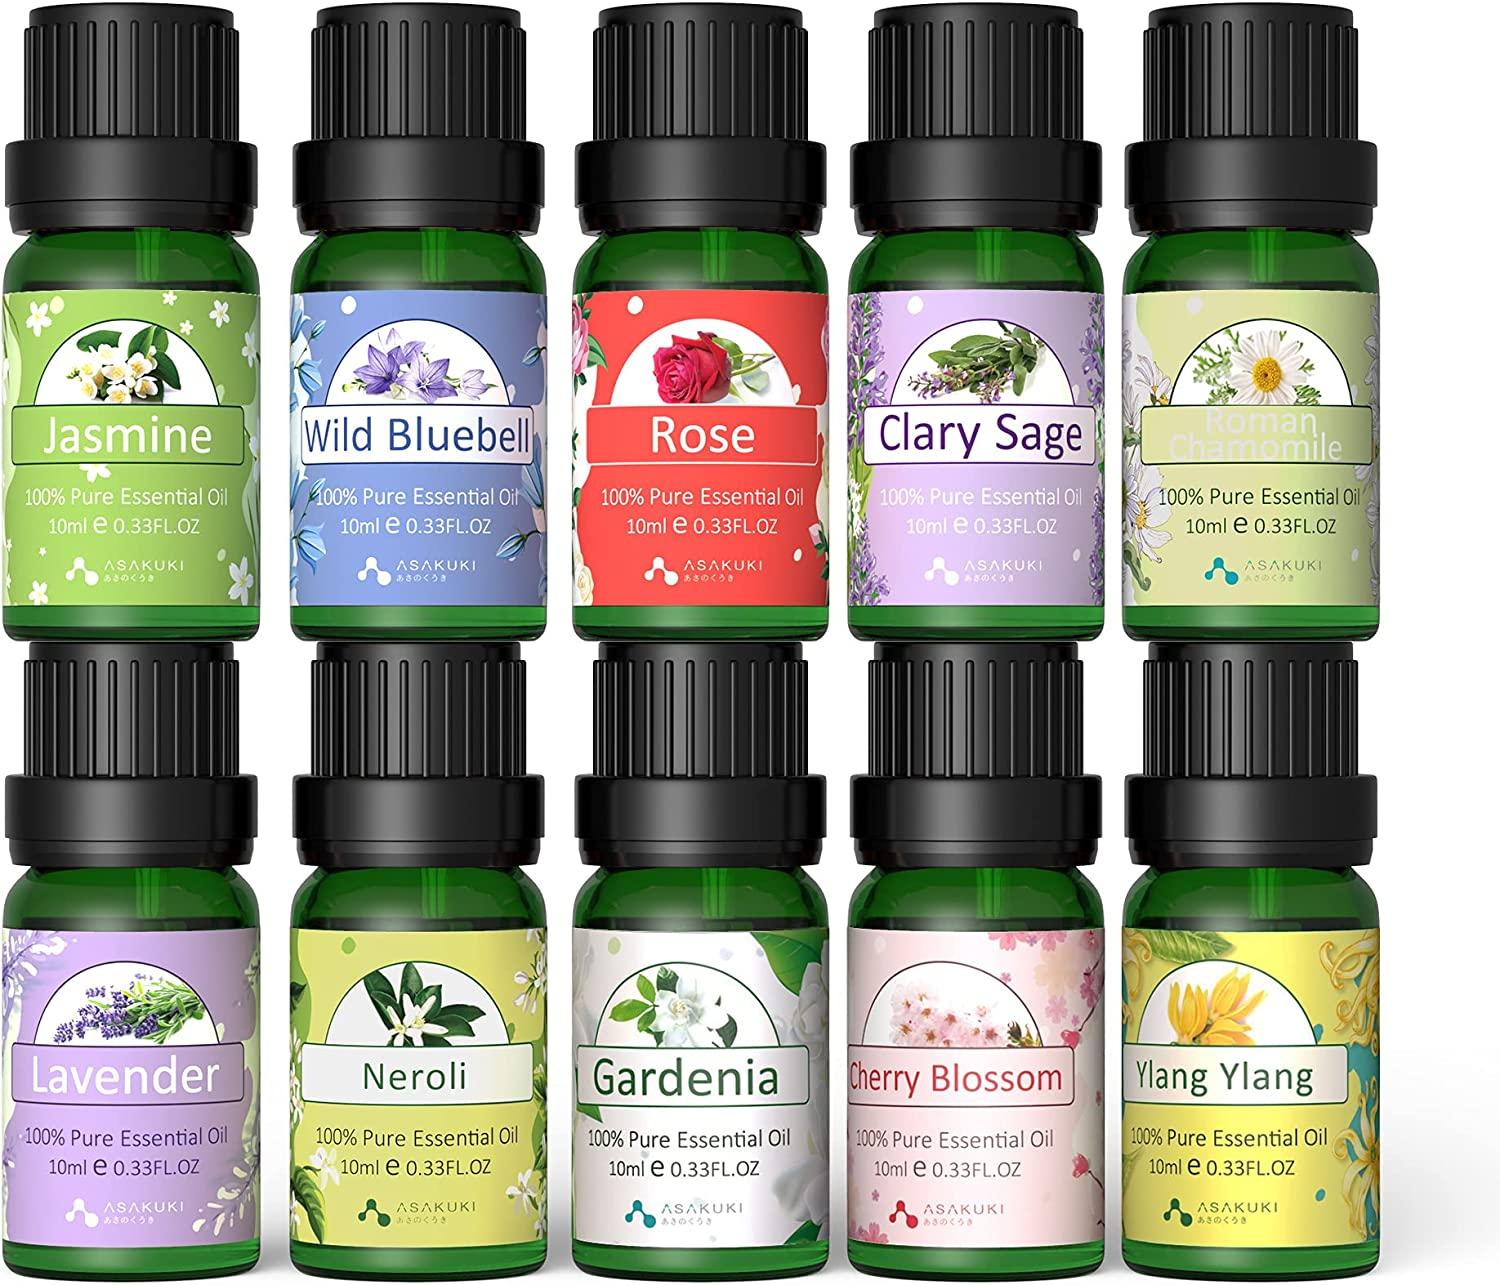 Oils for Diffuser 100% Pure Essential Oil Blends Handcrafted, Vegan,  Aromatherapy Oils for Diffusing Home Fragrance Housewarming Gift 